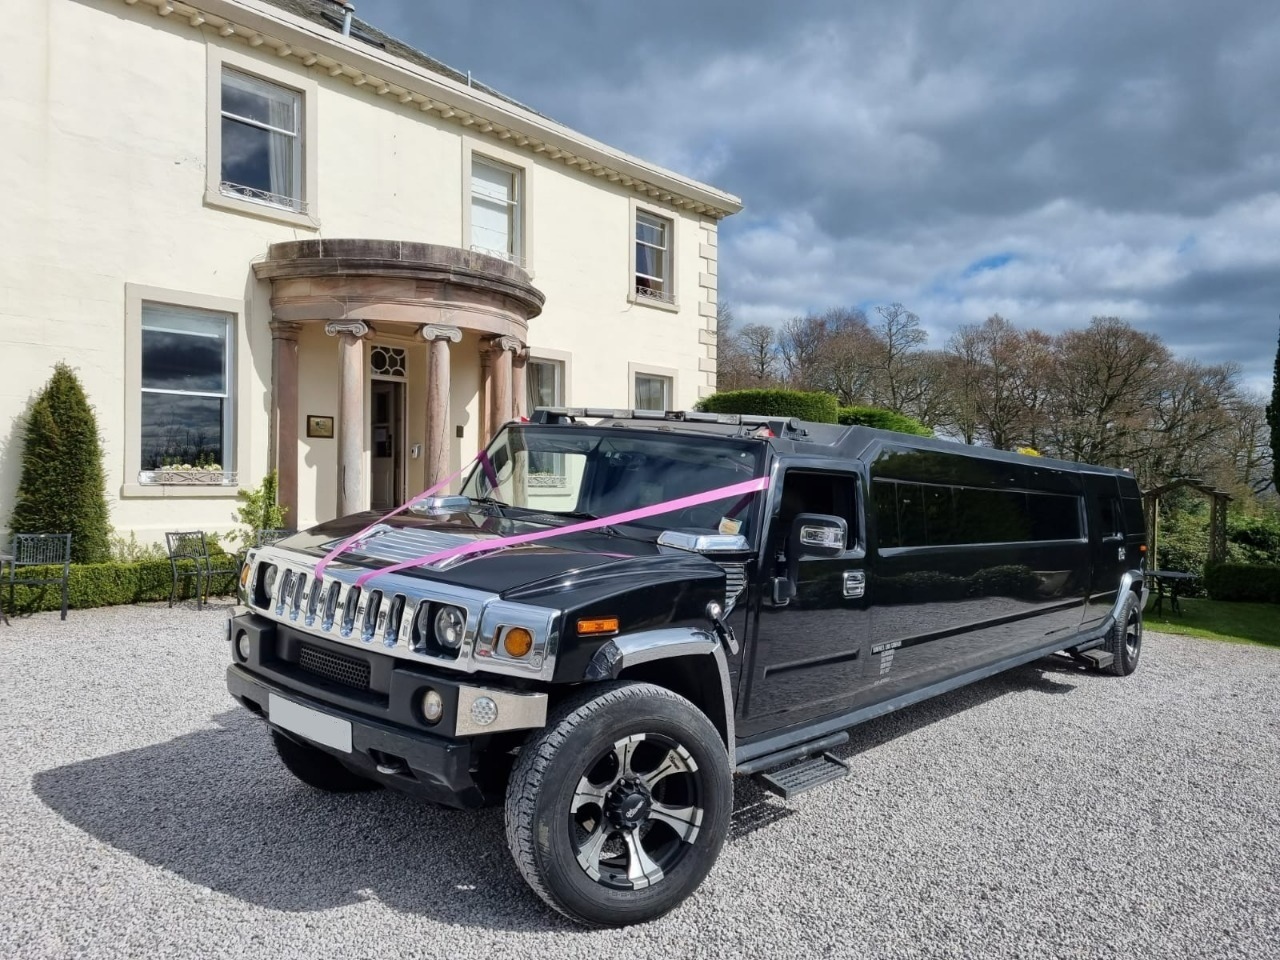 Black hummer Limo for Hire